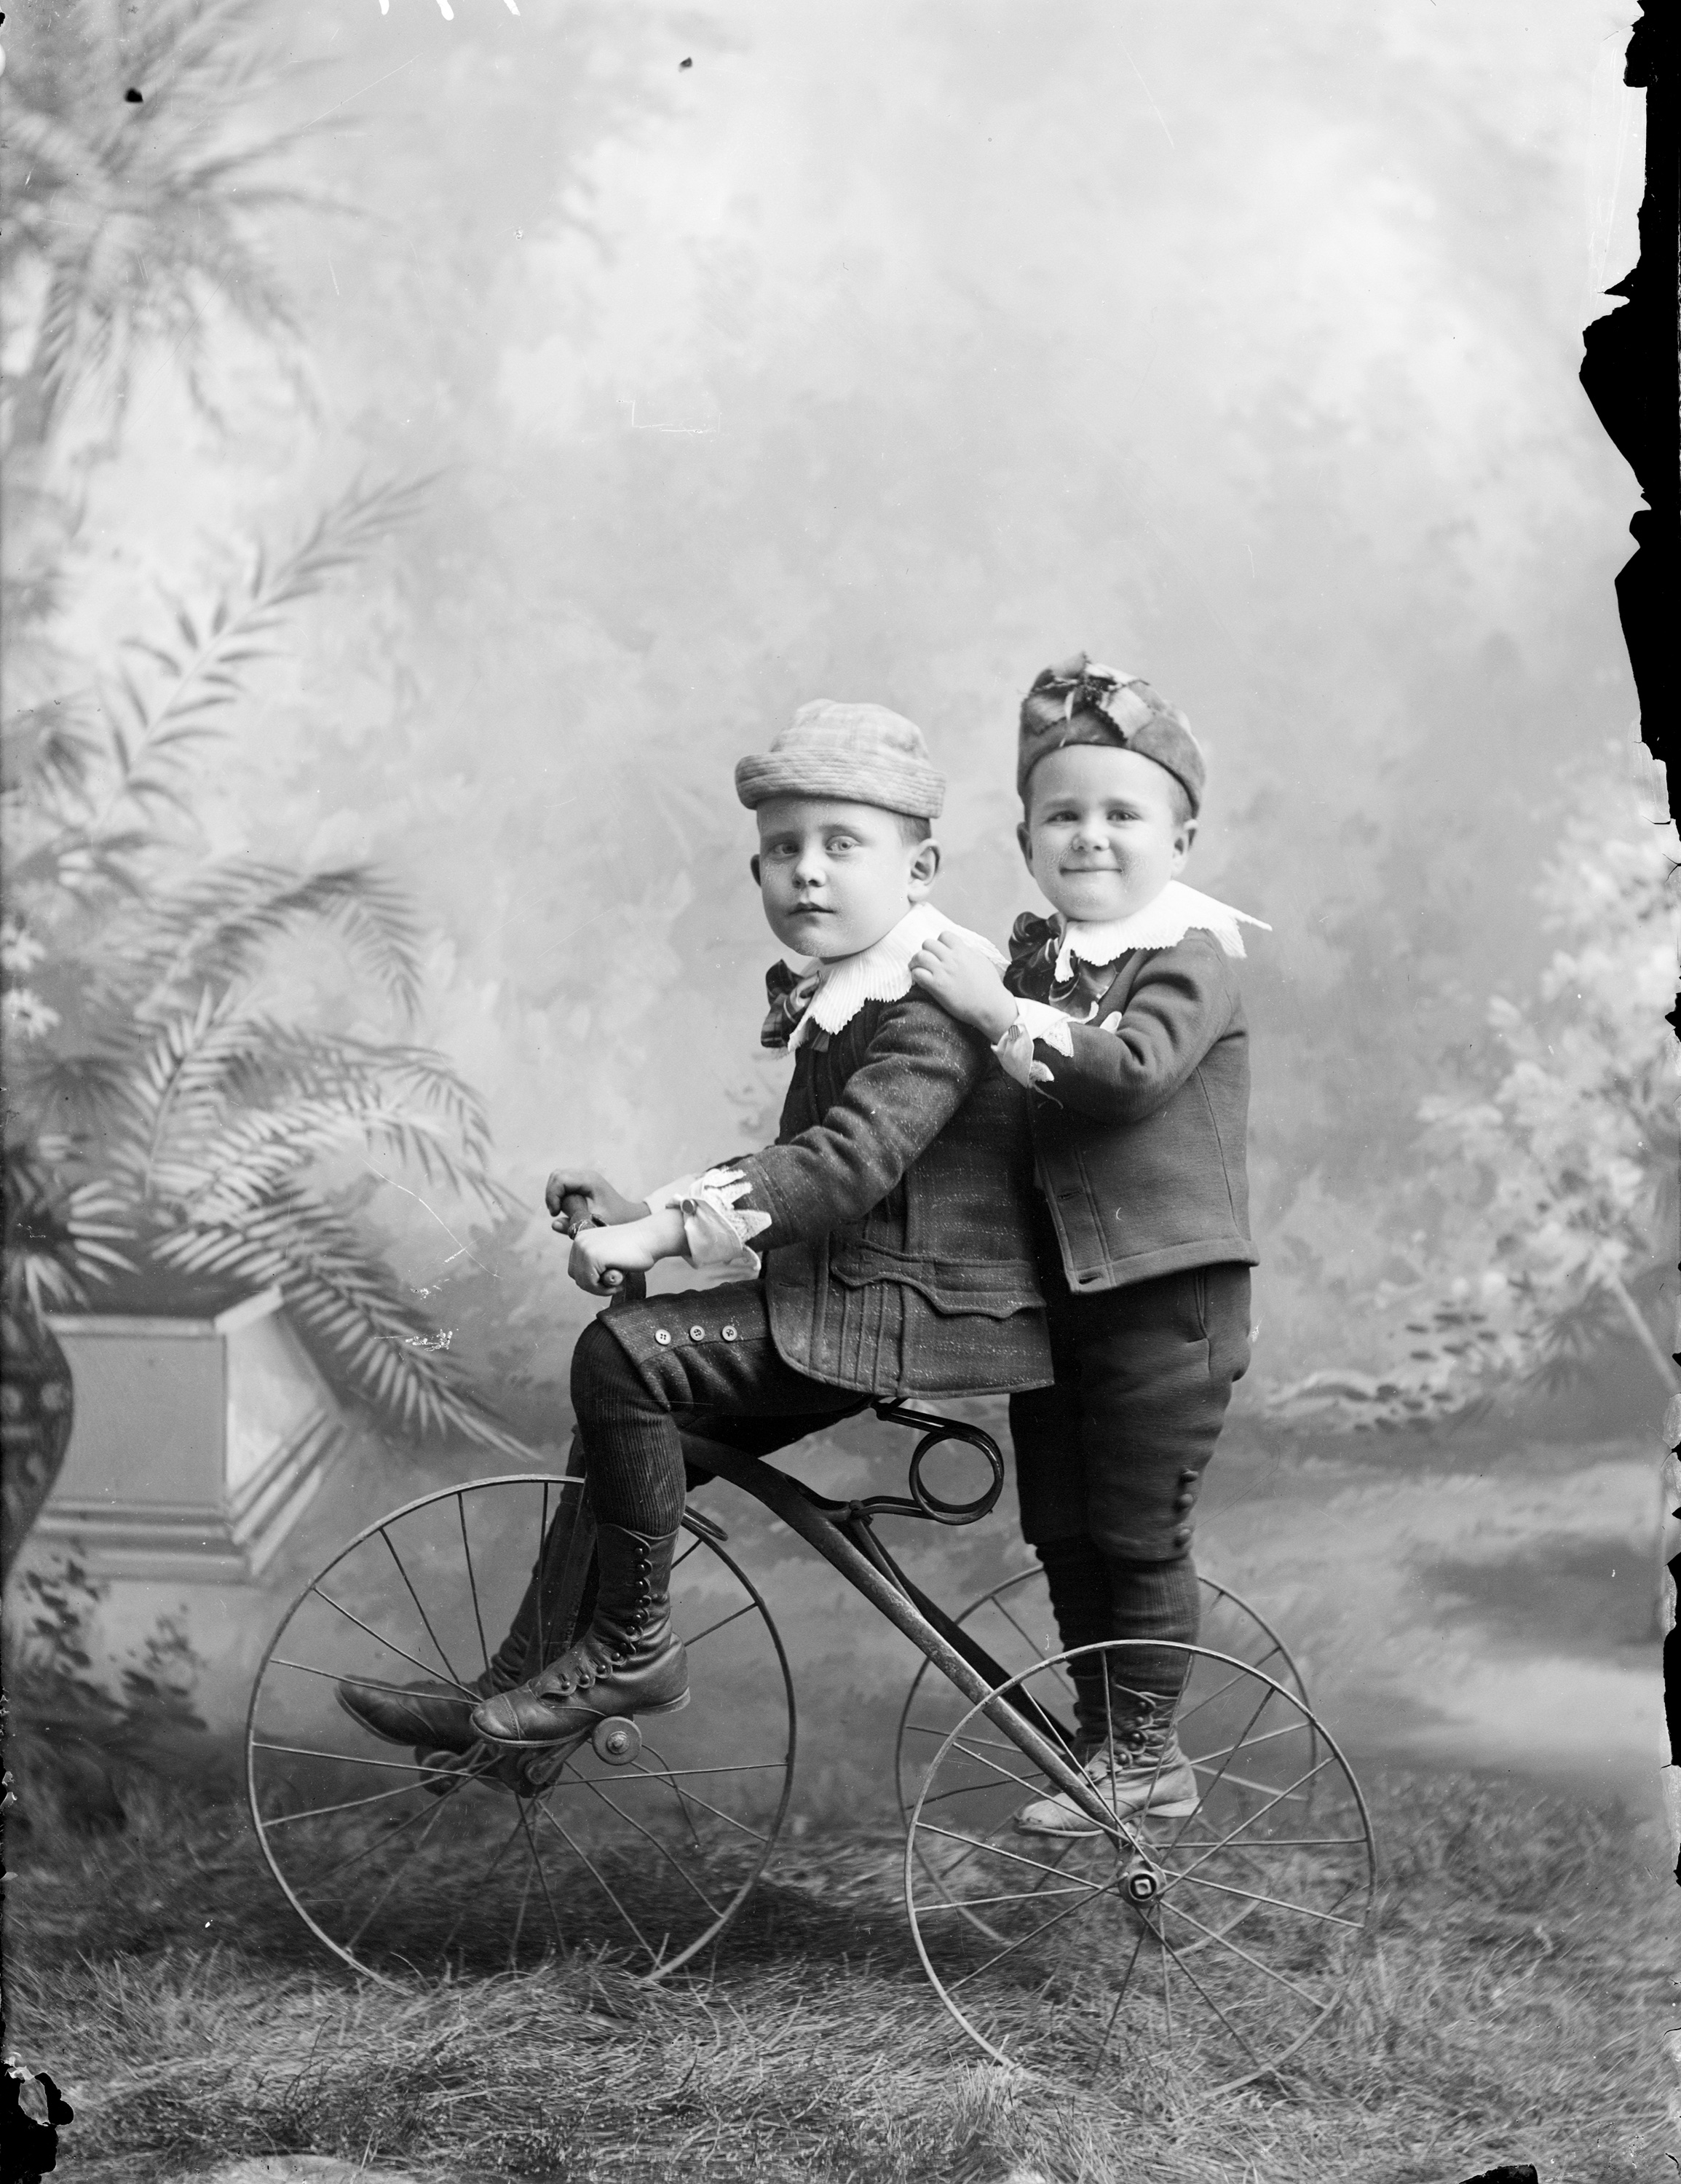 Children posing on a bicycle in a photo studio